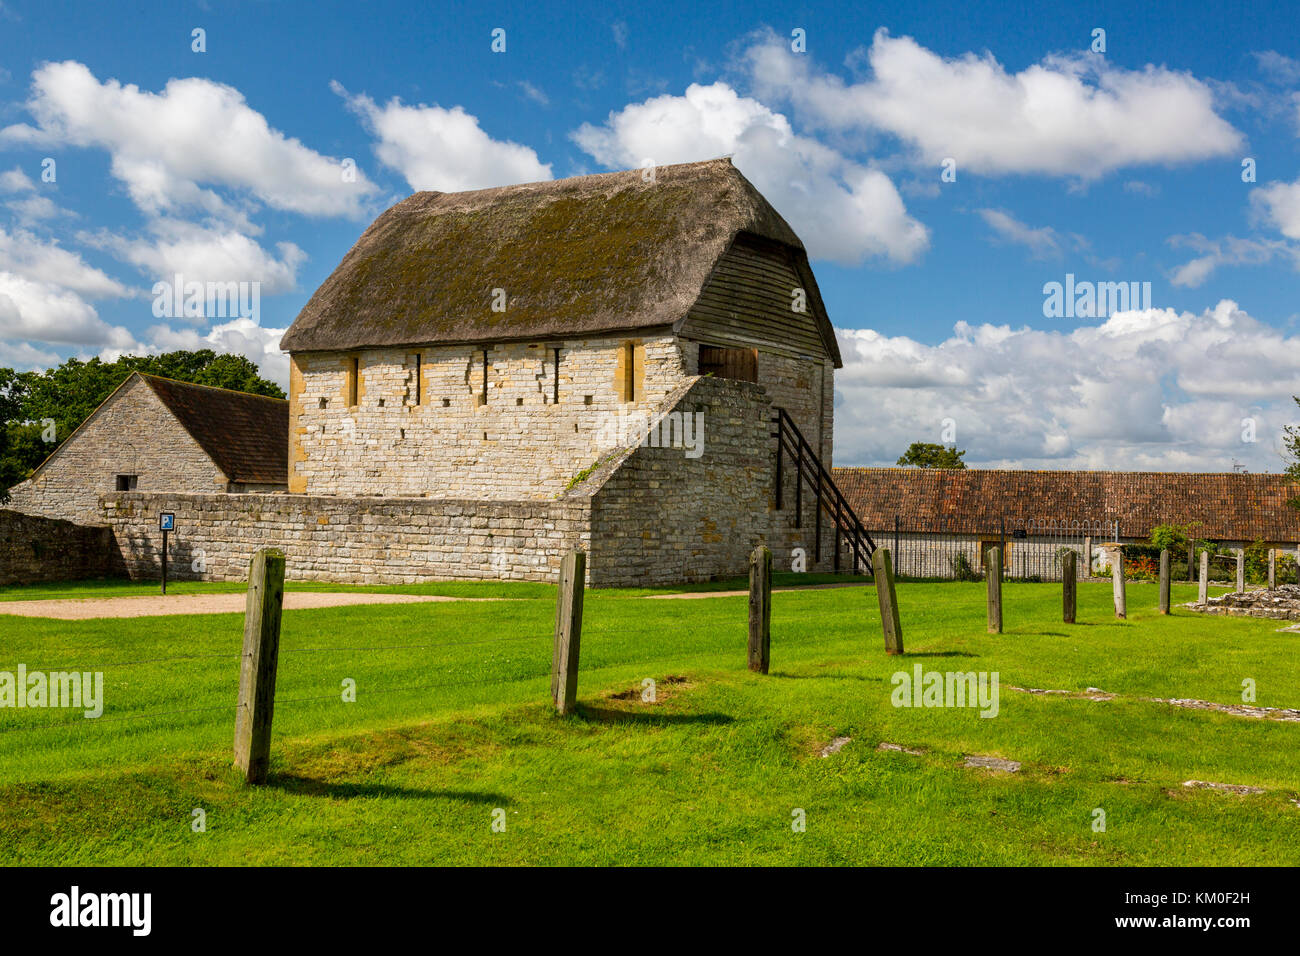 The reredorter (medieval lavatory building) of the former Benedictine abbey in Muchelney, Somerset, England, UK Stock Photo